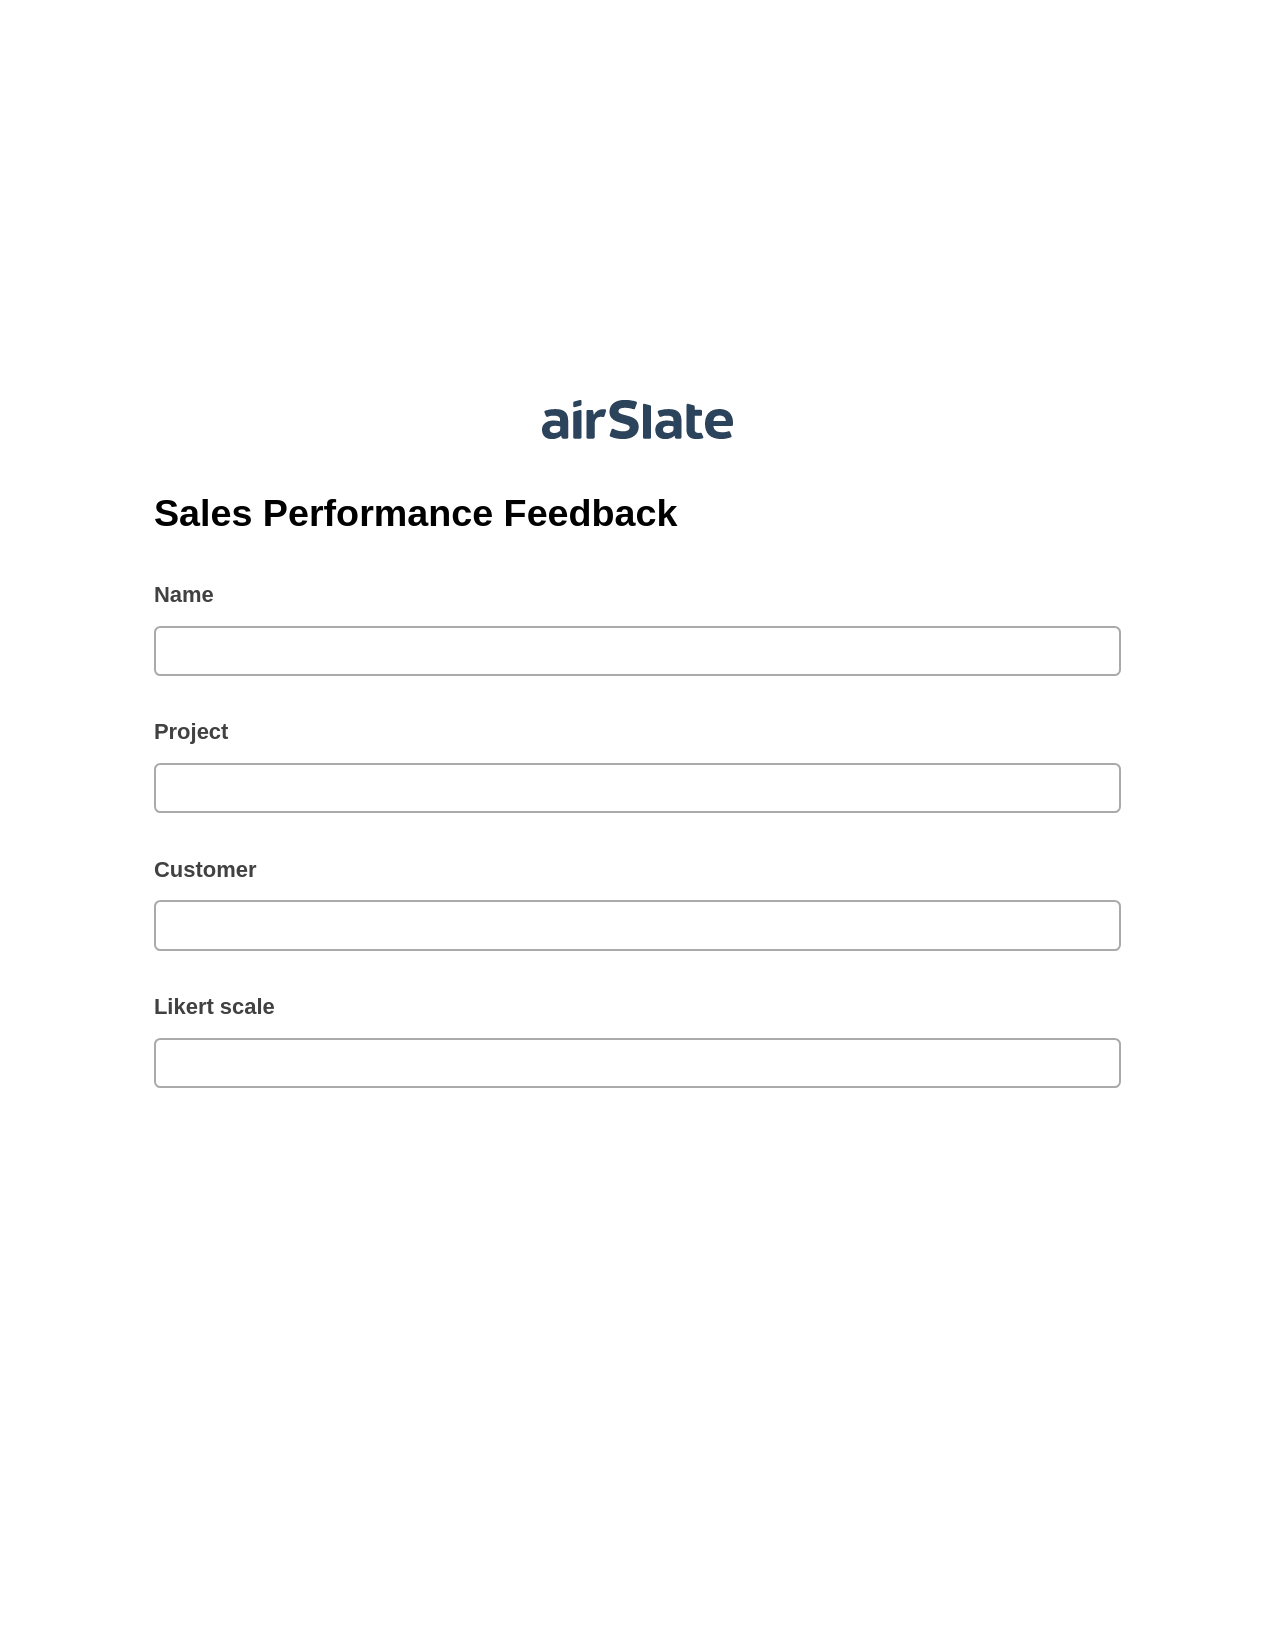 Sales Performance Feedback Pre-fill from another Slate Bot, Open as Role Bot, Export to NetSuite Record Bot